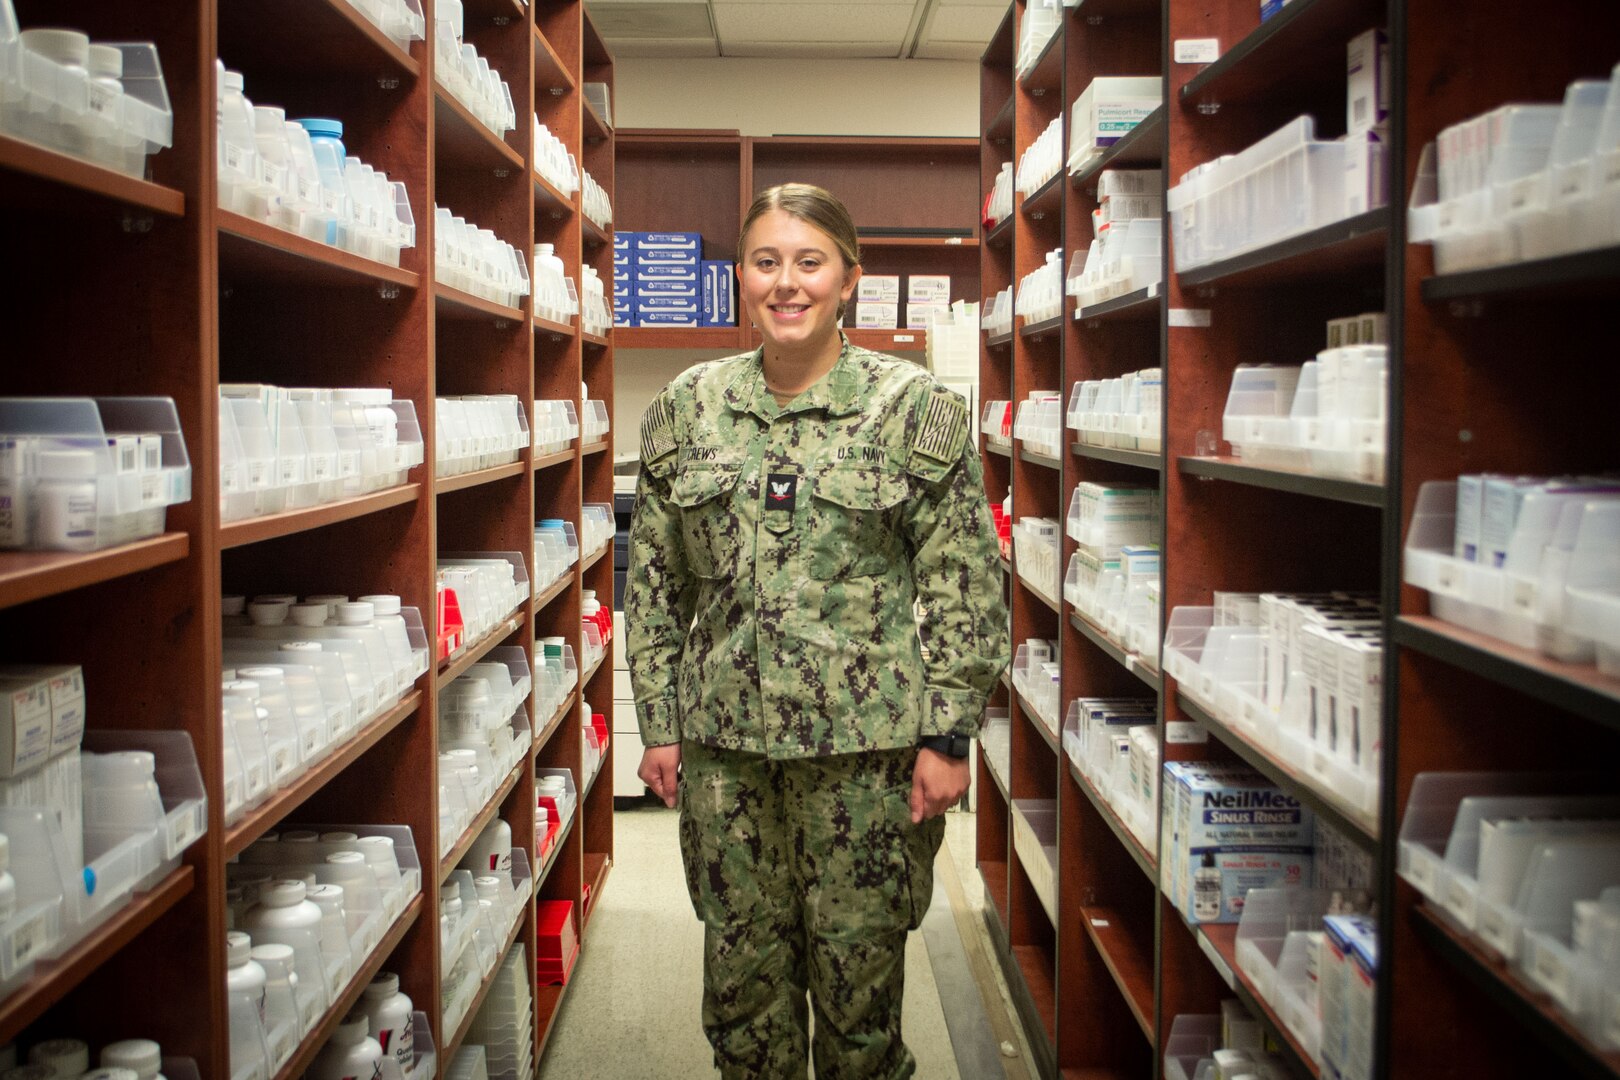 Hospital Corpsman Third Class Sophia Crews is the U.S. Navy’s Junior Pharmacy Technician of the Year for 2023.  The Phoenix Arizona Native serves aboard Naval Health Clinic Cherry Point as the Leading Petty Officer of the facility’s Pharmacy and credits the encouragement her father, a former rescue swimmer, as her inspiration to continue serving.